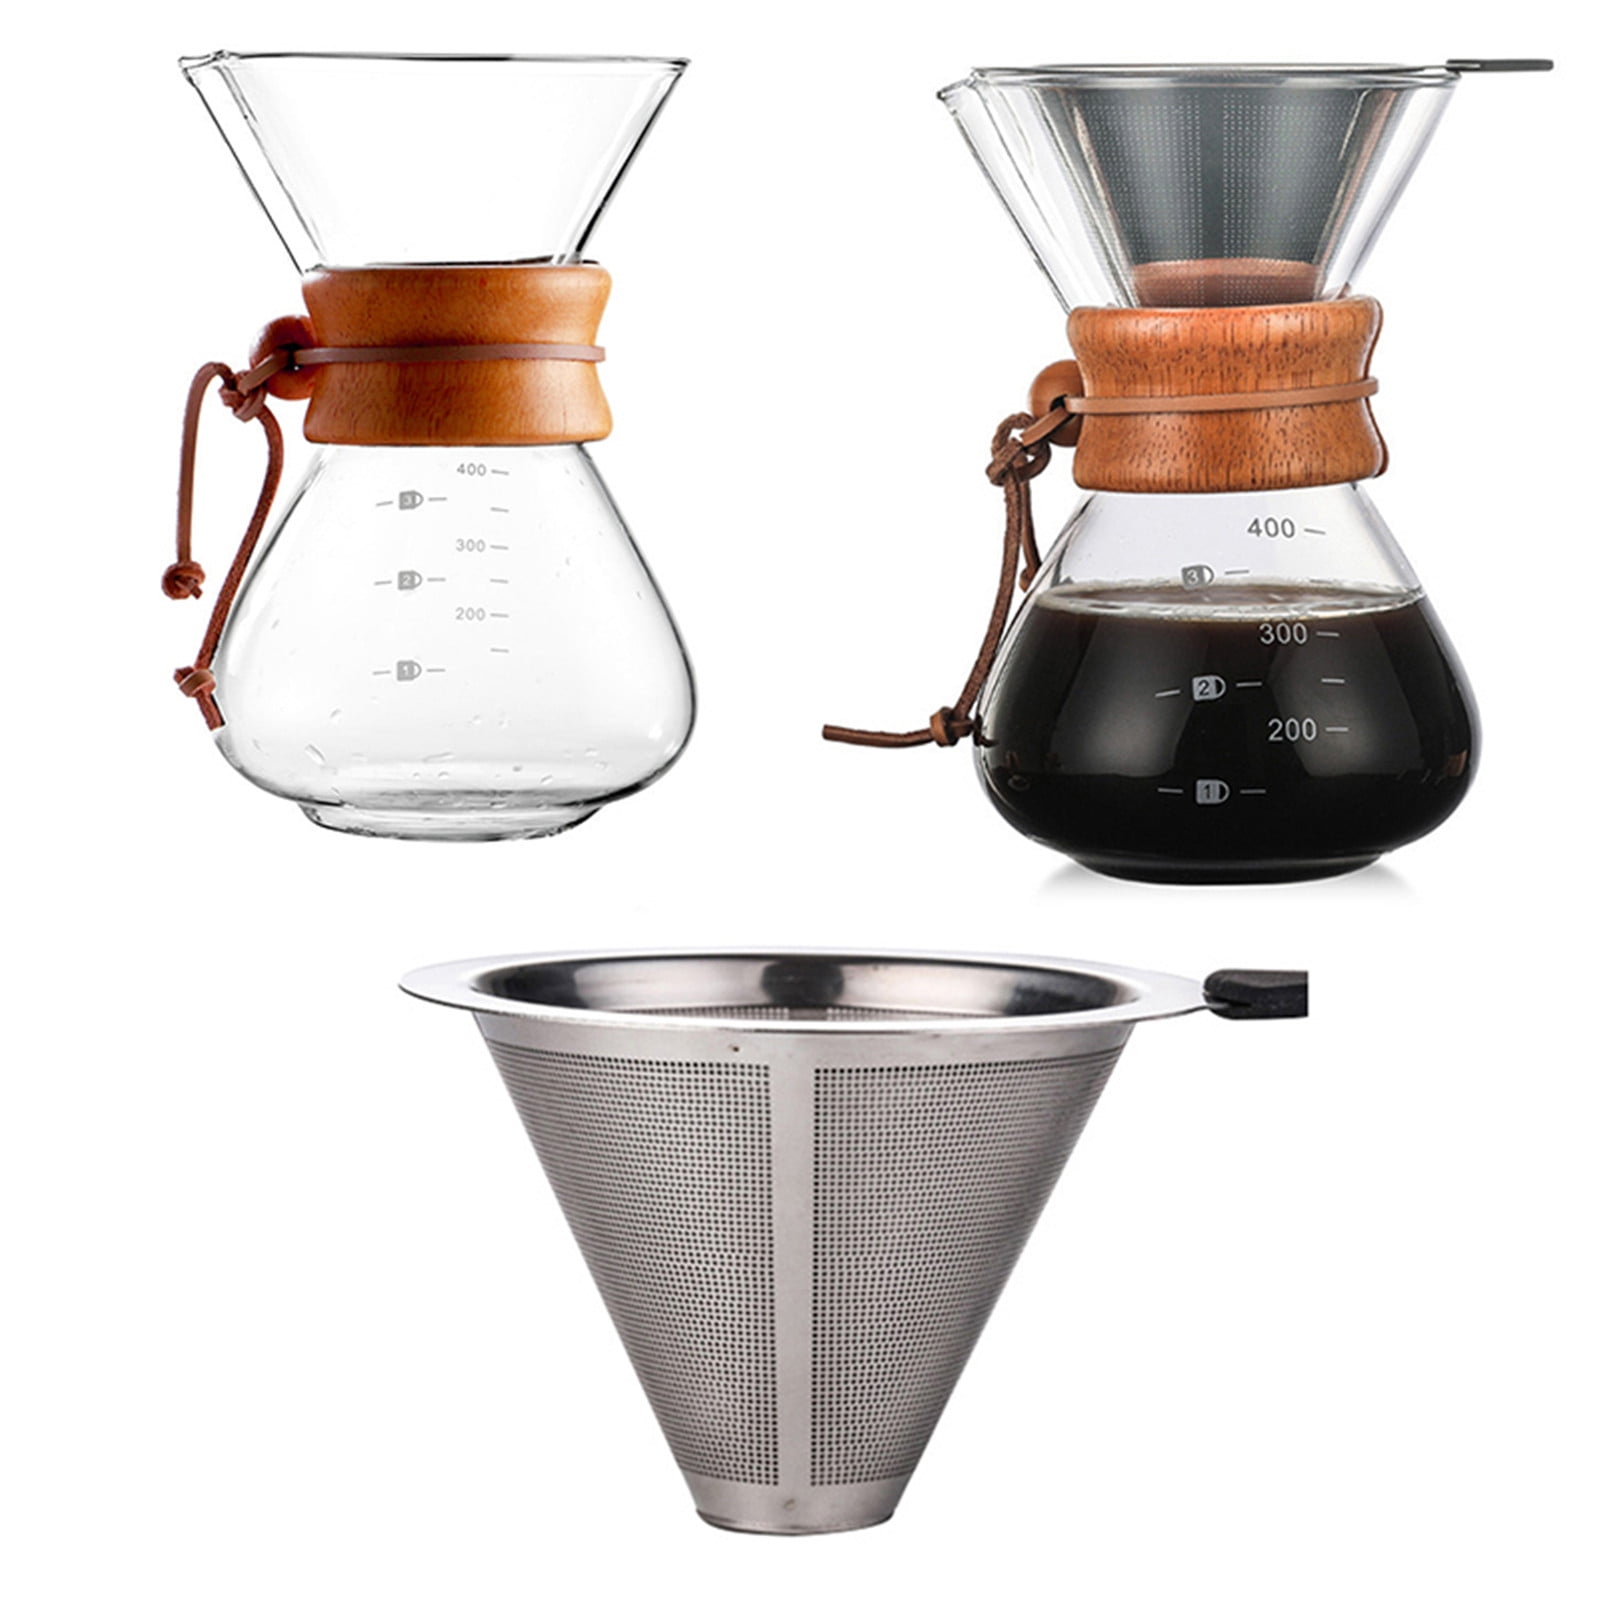 Unbreakable Pour Over Coffee Maker,800ml/27oz Paperless Borosilicate Glass  Carafe and Reusable Stainless Steel Permanent Filter,Glass Coffee